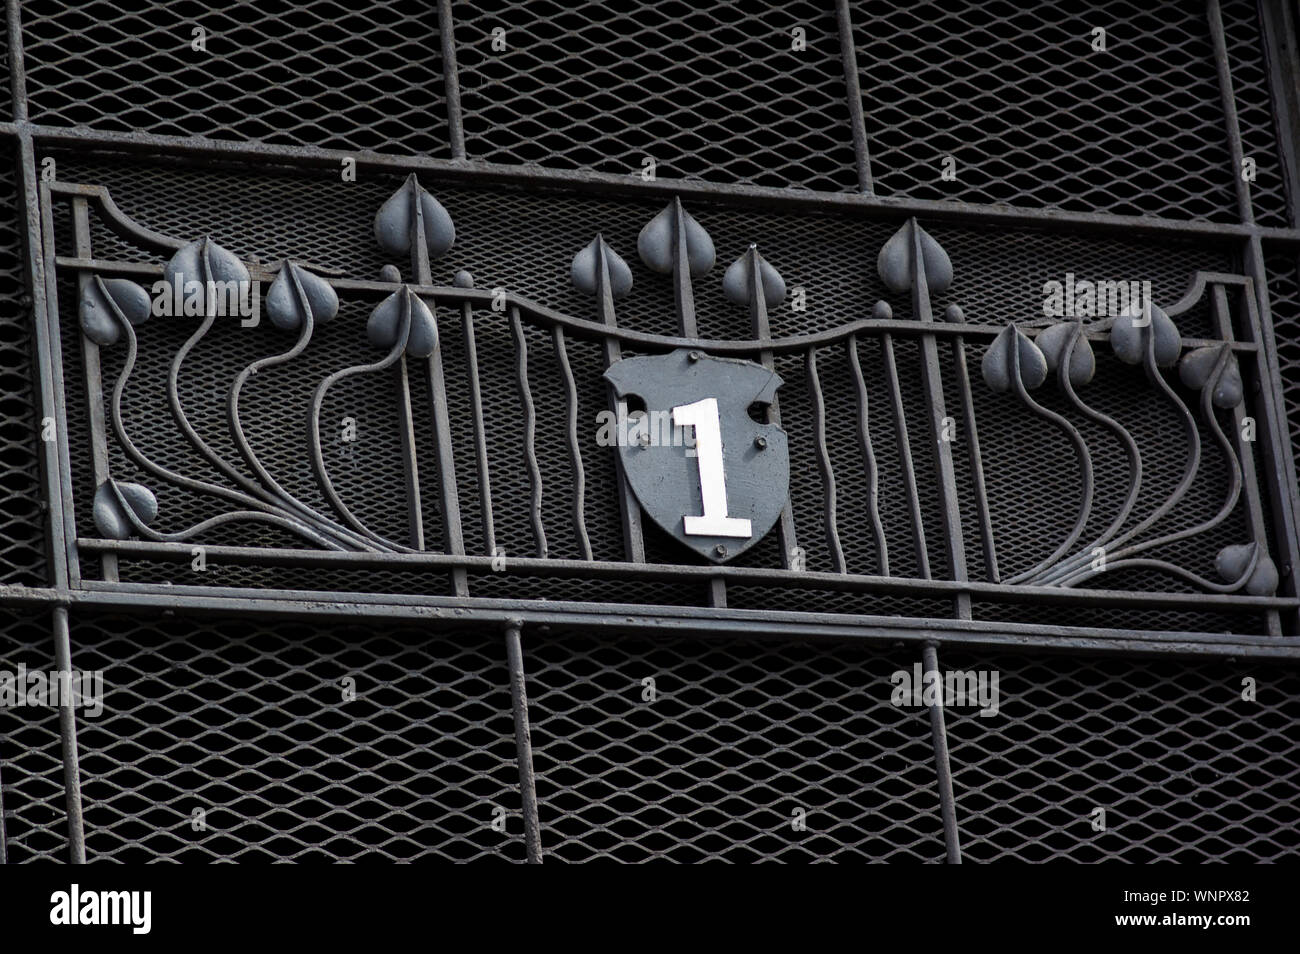 Black iron railing and grid with the number 1 on it and metal flower designs Stock Photo